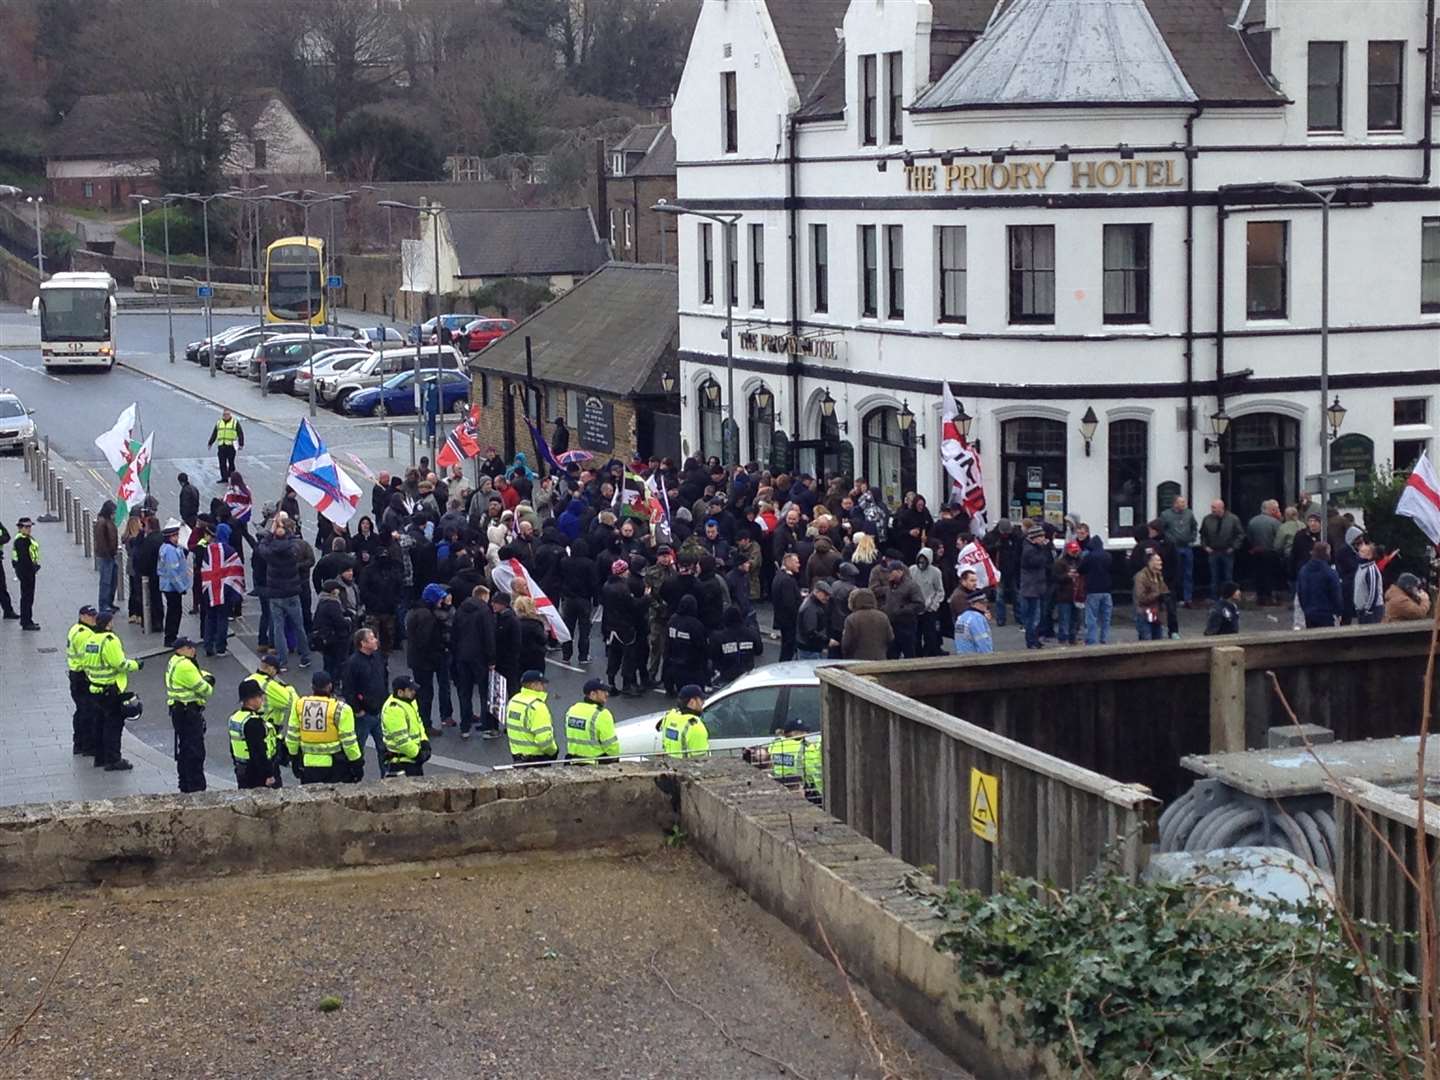 The National Front and South East Alliance was contained at the approach to Dover Priory train station before they set off at 1.20pm.